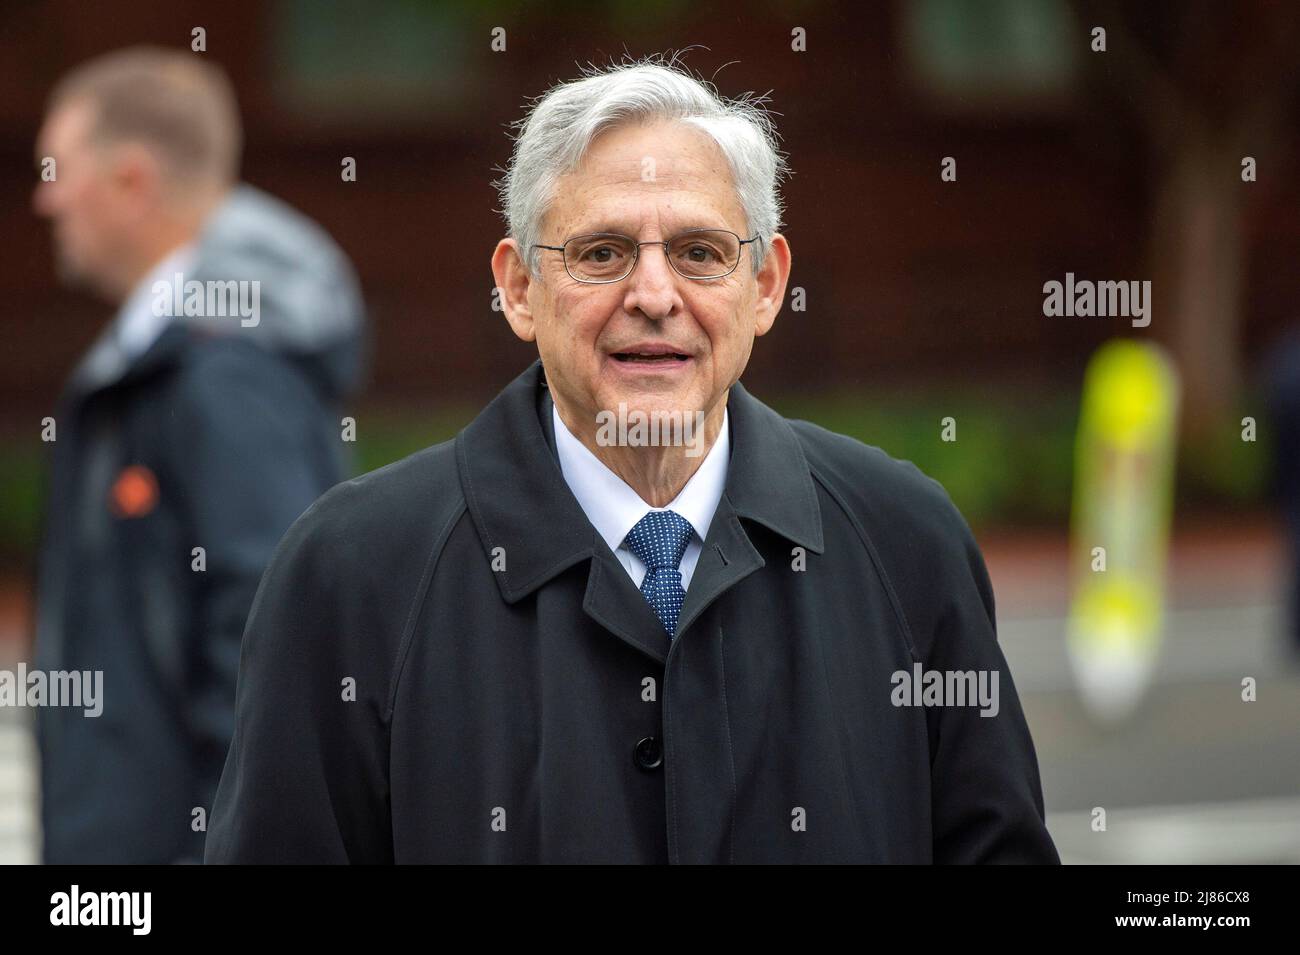 U.S. Attorney General Merrick Garland arrives at the National Law Enforcement Officers Memorial in honor of National Police Week in Washington, U.S., May 13, 2022.   Bonnie Cash/Pool via REUTERS Stock Photo